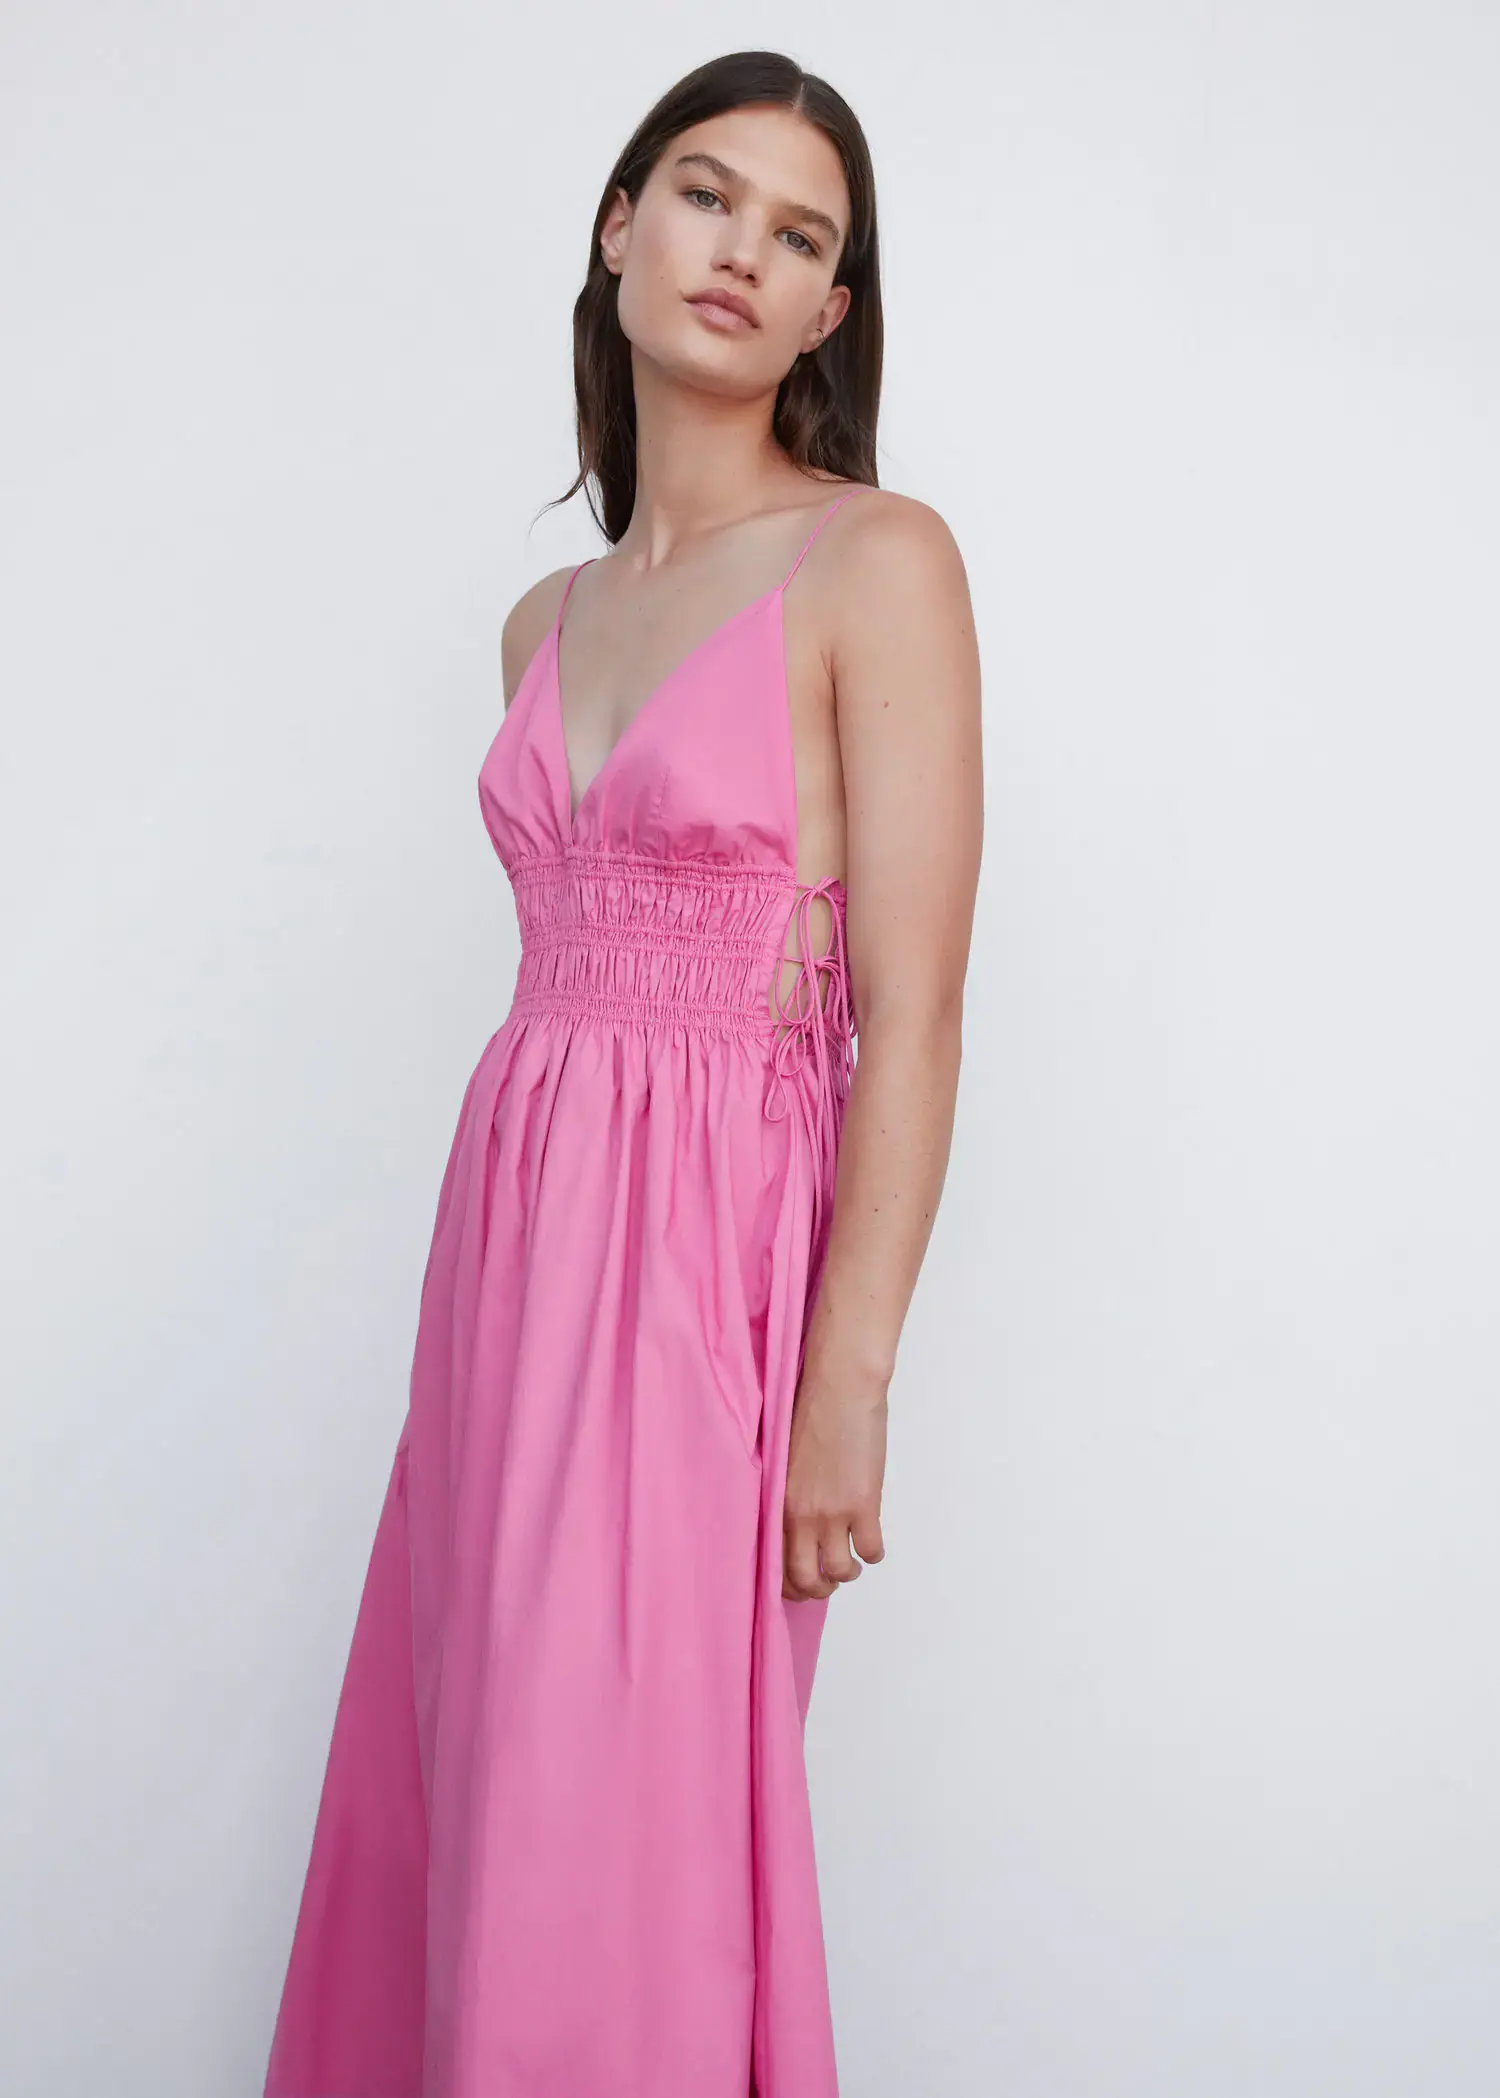 Mango Cotton dress with side ties. a woman wearing a pink dress standing next to a wall. 